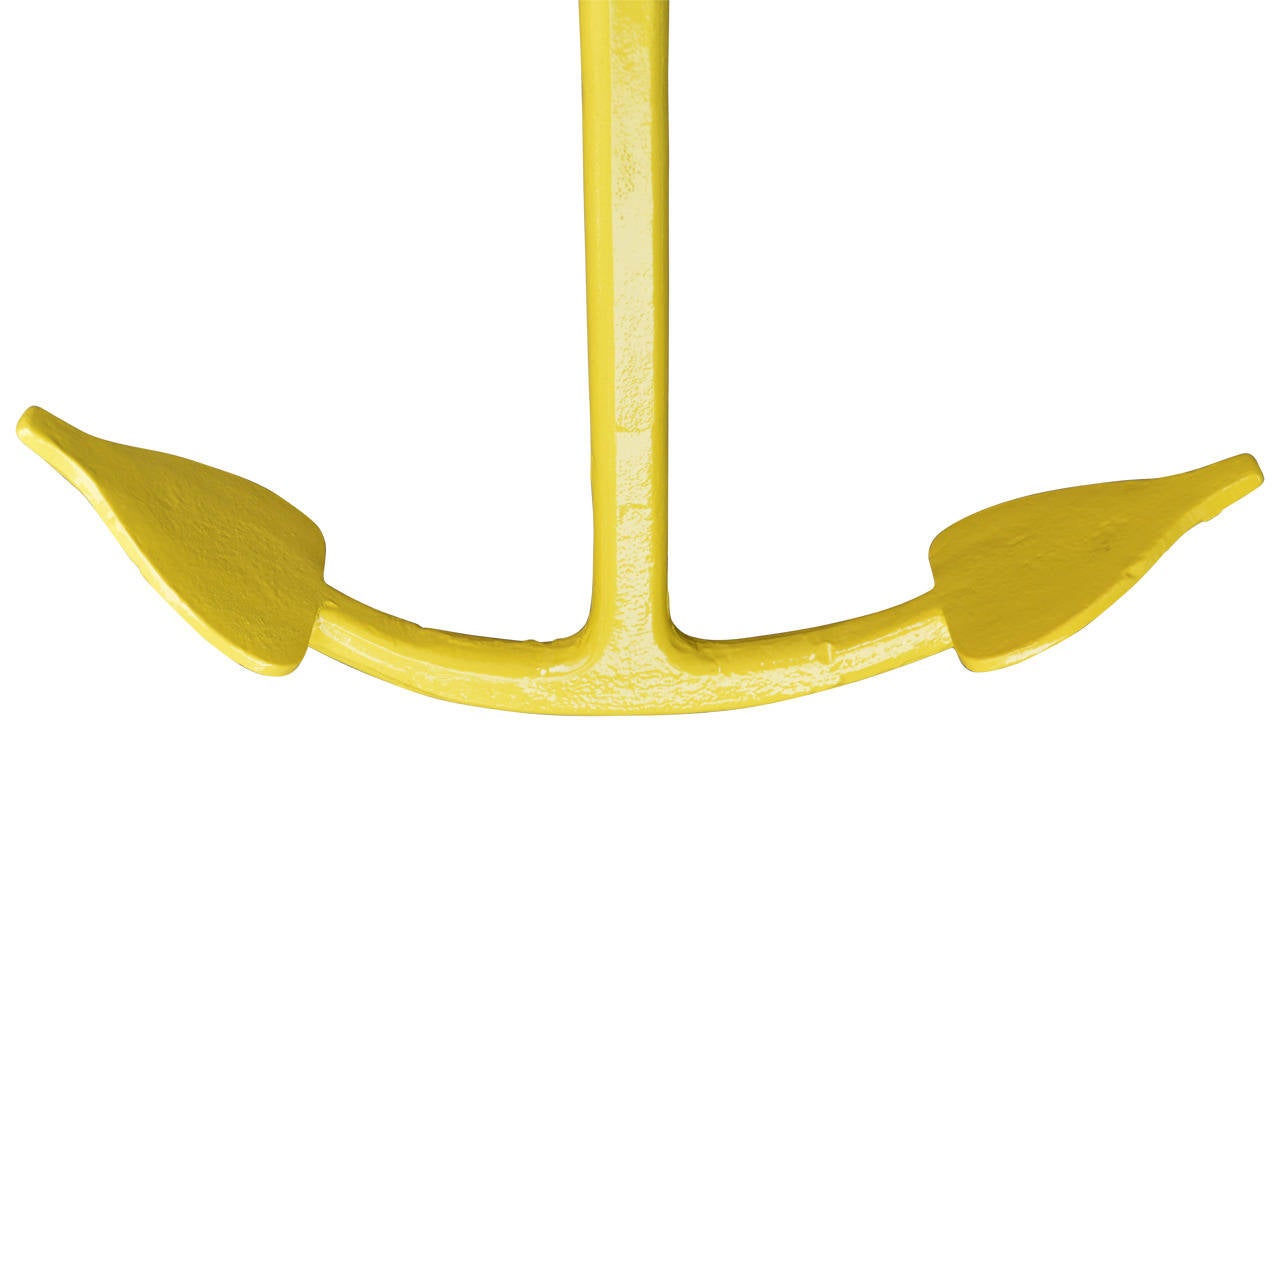 Large sunny yellow metal anchor to brighten any nautical space.